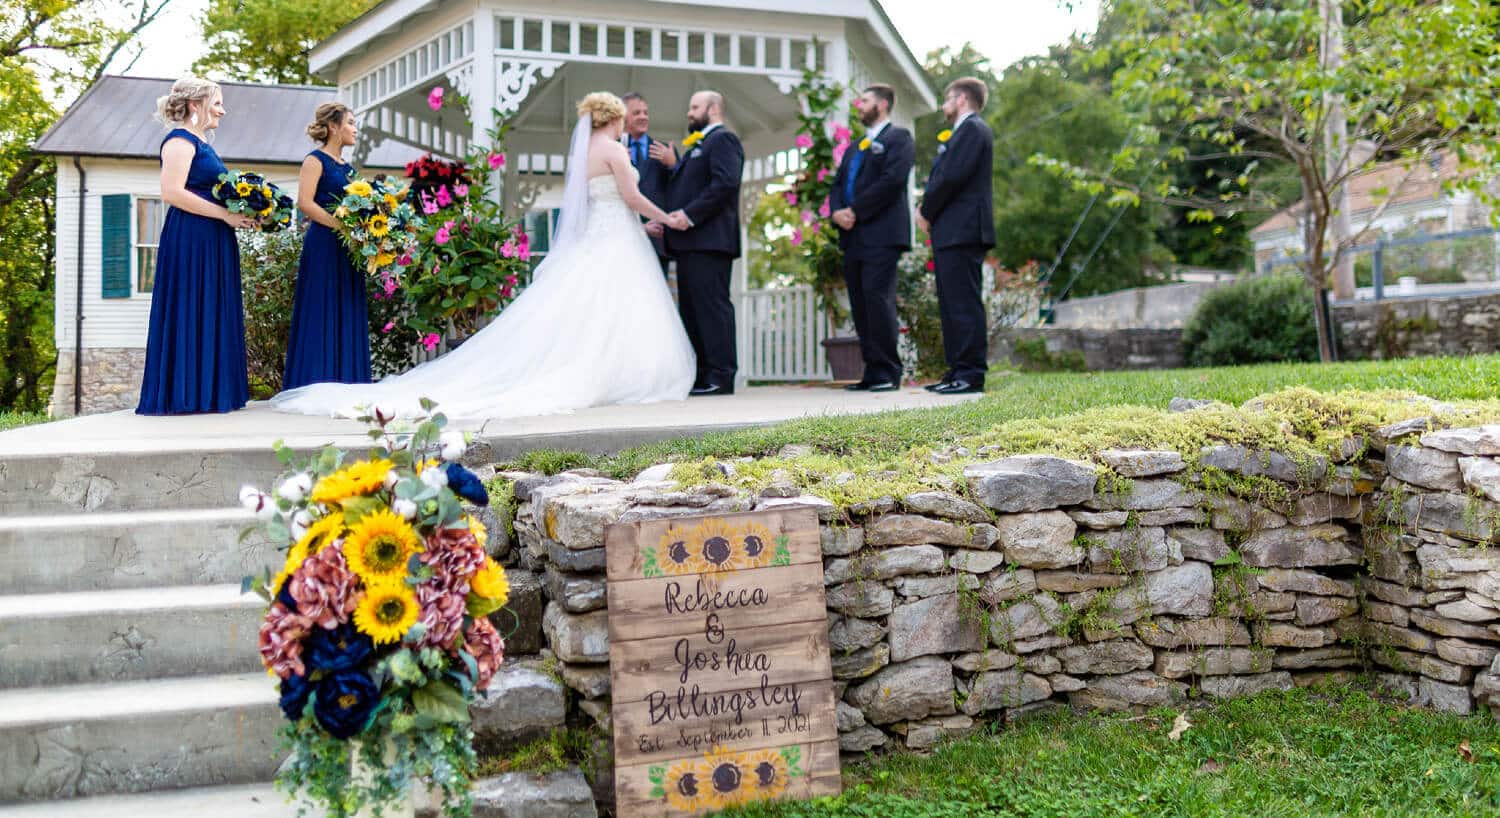 Bride and groom holding hands standing in front of minister by gazebo during ceremony with bridal party on each side, wood sign with bride and groom's names